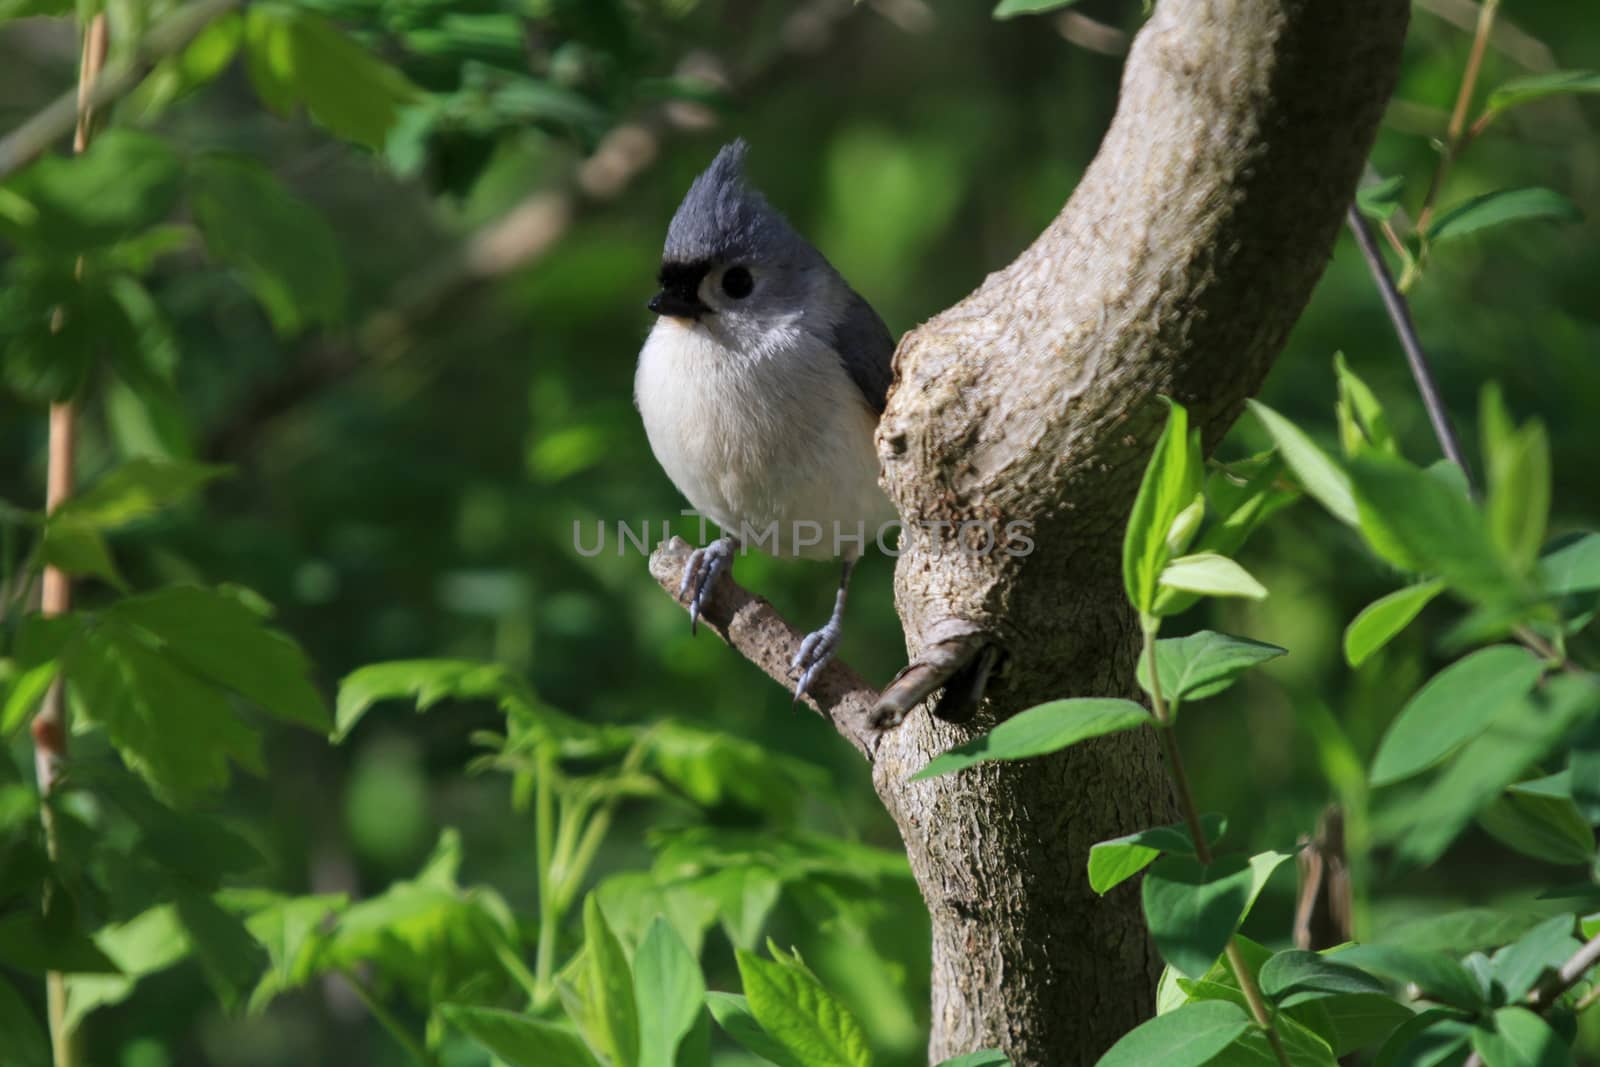 Tutfed Titmouse perched on branch in early morning sun